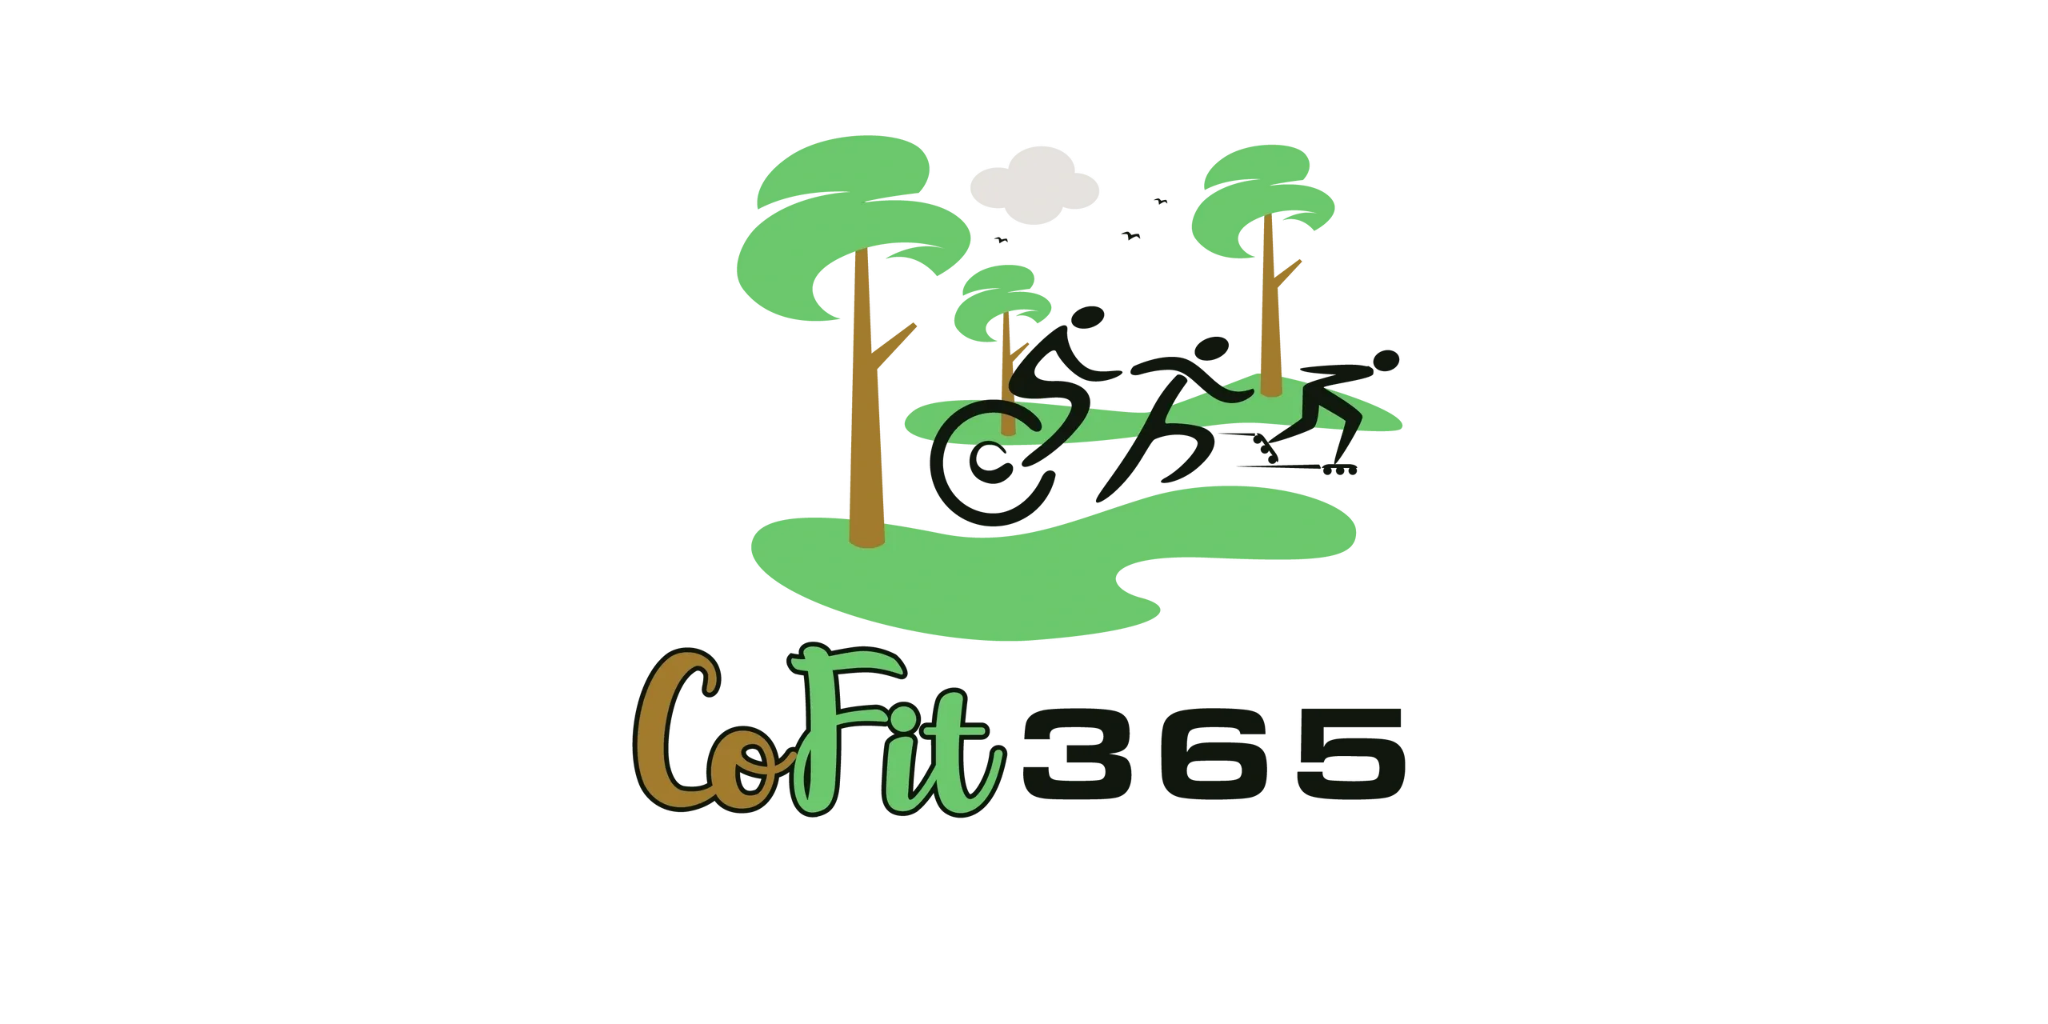 an featuring Co-Fit365 developed by Technbrains